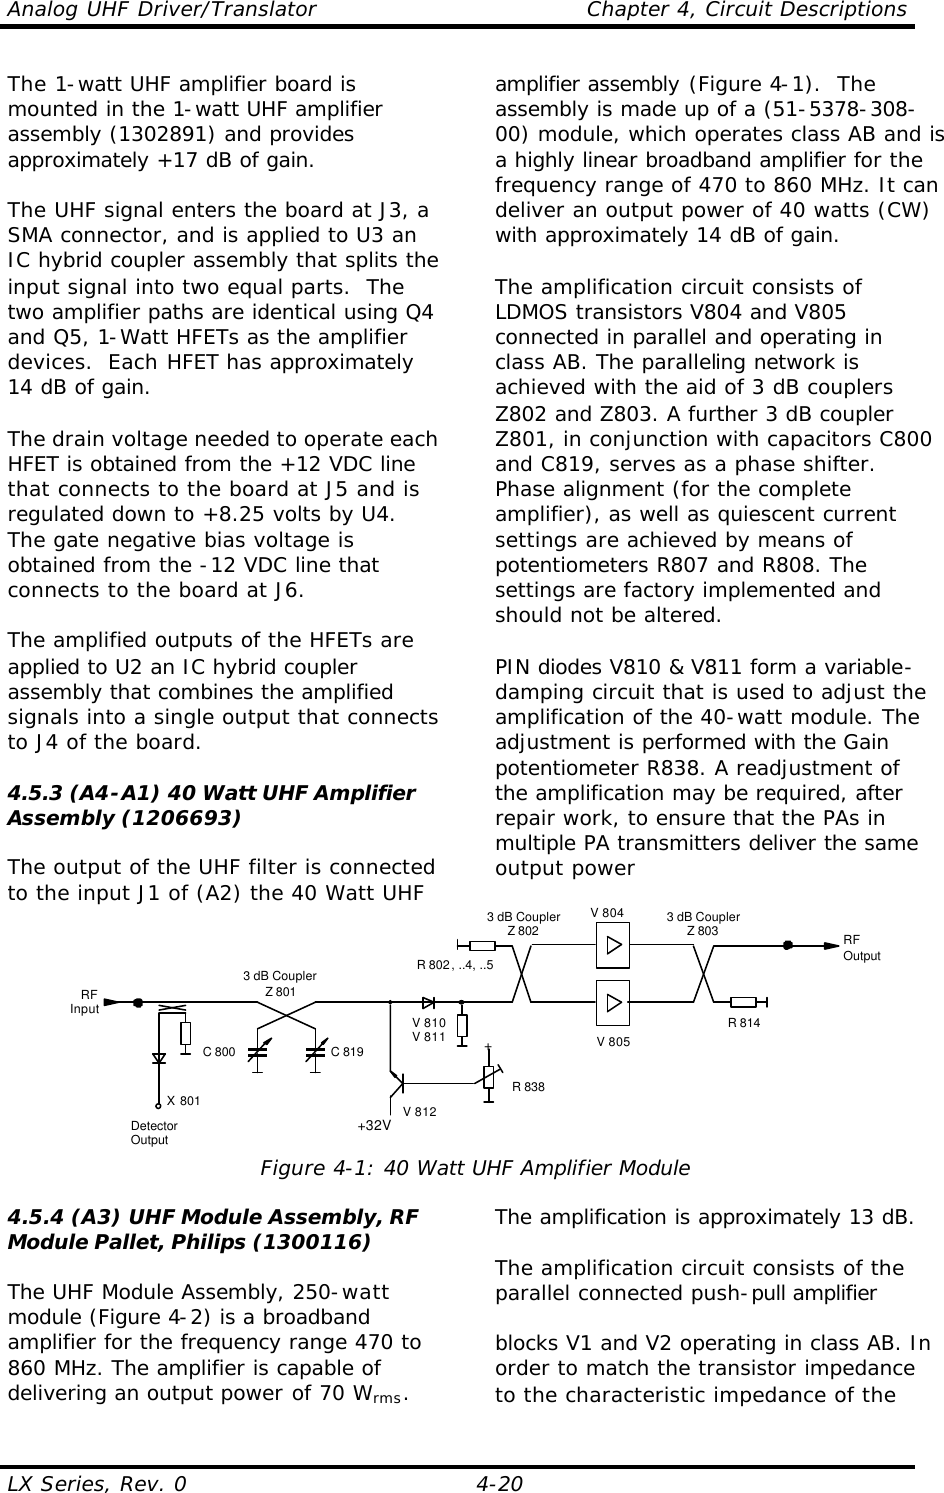 Analog UHF Driver/Translator    Chapter 4, Circuit Descriptions LX Series, Rev. 0    4-20 The 1-watt UHF amplifier board is mounted in the 1-watt UHF amplifier assembly (1302891) and provides approximately +17 dB of gain.  The UHF signal enters the board at J3, a SMA connector, and is applied to U3 an IC hybrid coupler assembly that splits the input signal into two equal parts.  The two amplifier paths are identical using Q4 and Q5, 1-Watt HFETs as the amplifier devices.  Each HFET has approximately 14 dB of gain.    The drain voltage needed to operate each HFET is obtained from the +12 VDC line that connects to the board at J5 and is regulated down to +8.25 volts by U4.  The gate negative bias voltage is obtained from the -12 VDC line that connects to the board at J6.  The amplified outputs of the HFETs are applied to U2 an IC hybrid coupler assembly that combines the amplified signals into a single output that connects to J4 of the board.  4.5.3 (A4-A1) 40 Watt UHF Amplifier Assembly (1206693)  The output of the UHF filter is connected to the input J1 of (A2) the 40 Watt UHF amplifier assembly (Figure 4-1).  The assembly is made up of a (51-5378-308-00) module, which operates class AB and is a highly linear broadband amplifier for the frequency range of 470 to 860 MHz. It can deliver an output power of 40 watts (CW) with approximately 14 dB of gain.  The amplification circuit consists of LDMOS transistors V804 and V805 connected in parallel and operating in class AB. The paralleling network is achieved with the aid of 3 dB couplers Z802 and Z803. A further 3 dB coupler Z801, in conjunction with capacitors C800 and C819, serves as a phase shifter. Phase alignment (for the complete amplifier), as well as quiescent current settings are achieved by means of potentiometers R807 and R808. The settings are factory implemented and should not be altered.  PIN diodes V810 &amp; V811 form a variable-damping circuit that is used to adjust the amplification of the 40-watt module. The adjustment is performed with the Gain potentiometer R838. A readjustment of the amplification may be required, after repair work, to ensure that the PAs in multiple PA transmitters deliver the same output power V 805V 8043 dB CouplerZ 801RFOutputRFInput R 814R 802, ..4, ..5C 800 C 819DetectorOutputX 801+32V+R 838V 810V 811V 8123 dB CouplerZ 802 3 dB CouplerZ 803 Figure 4-1: 40 Watt UHF Amplifier Module  4.5.4 (A3) UHF Module Assembly, RF Module Pallet, Philips (1300116)  The UHF Module Assembly, 250-watt module (Figure 4-2) is a broadband amplifier for the frequency range 470 to 860 MHz. The amplifier is capable of delivering an output power of 70 Wrms. The amplification is approximately 13 dB.  The amplification circuit consists of the parallel connected push-pull amplifier   blocks V1 and V2 operating in class AB. In order to match the transistor impedance to the characteristic impedance of the 